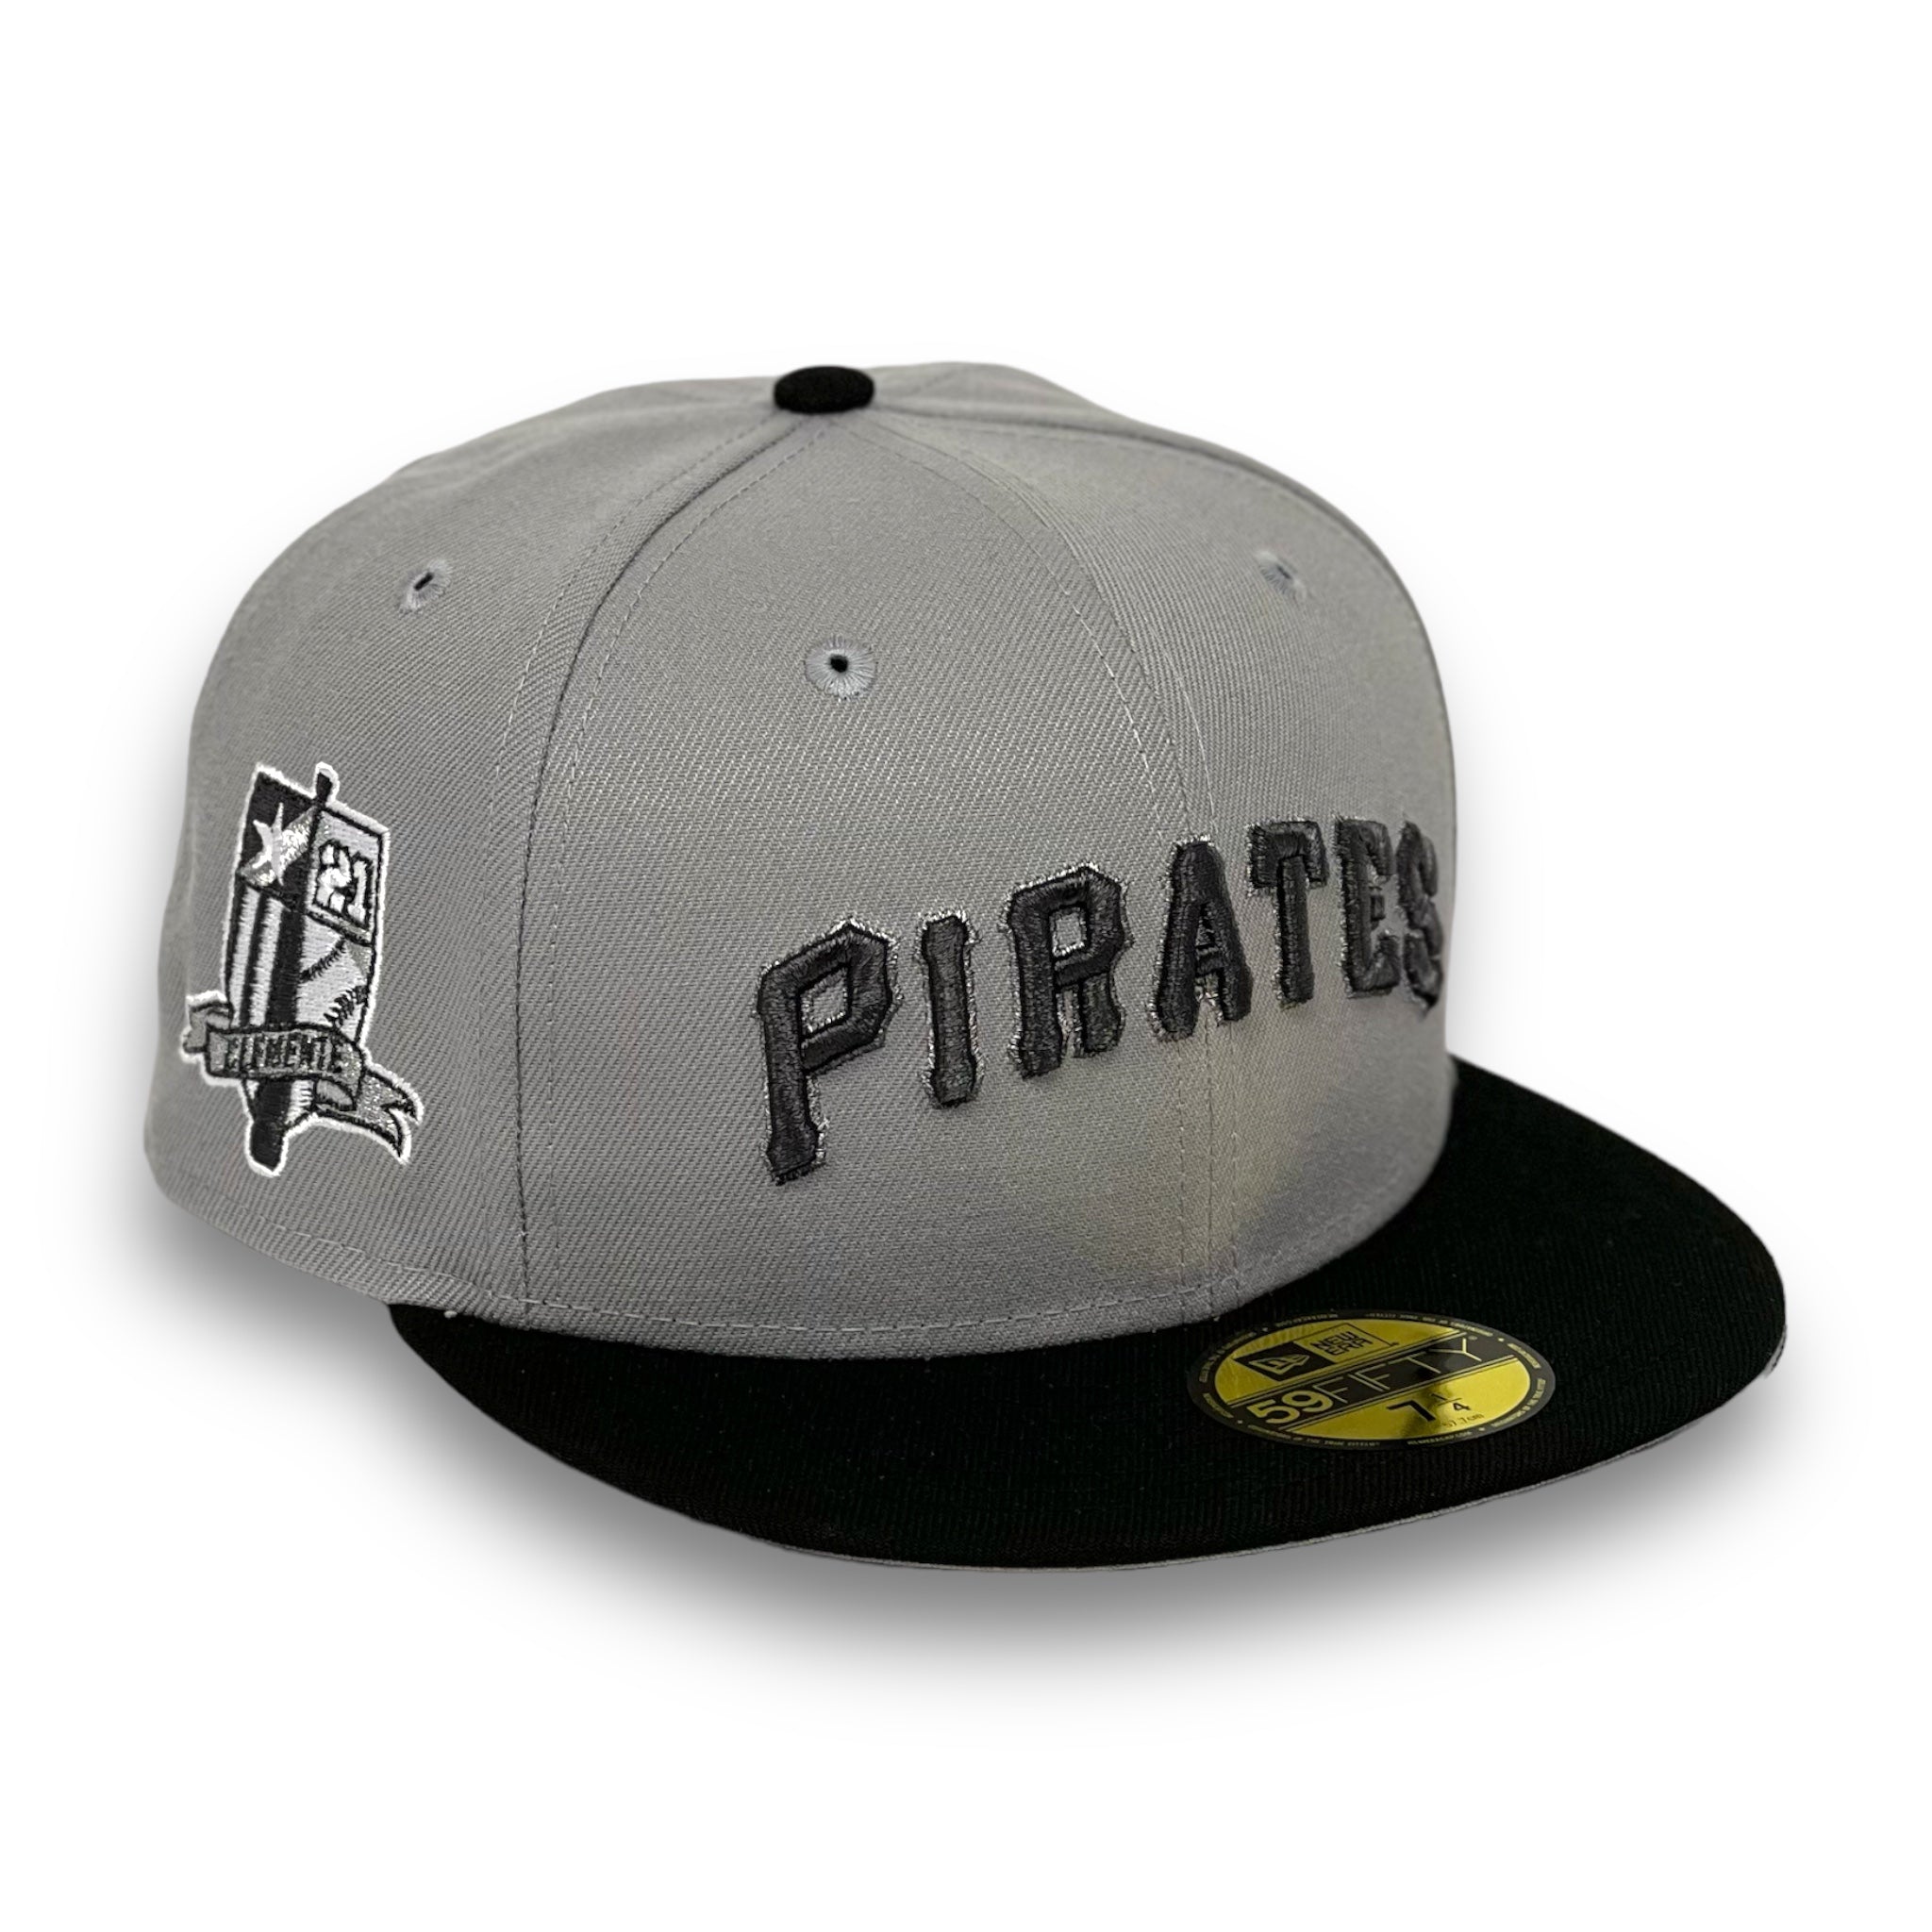 PITTSBURGH PIRATES (GREY)(ROBERTO CLEMENTE) NEW ERA 59FIFTY FITTED